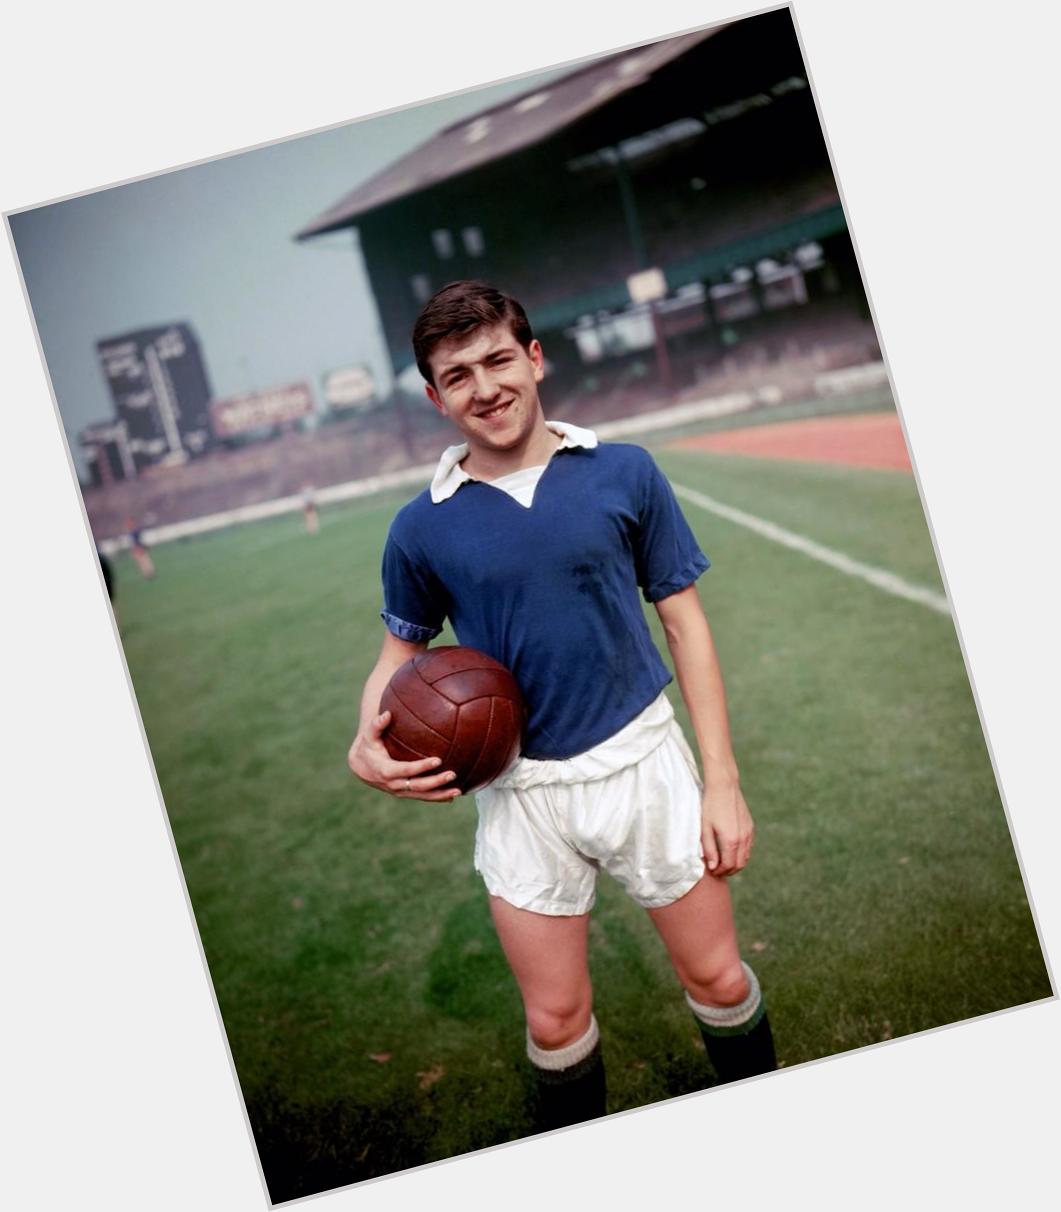 Happy birthday to former Blue - Terry Venables who turns 72 today! 